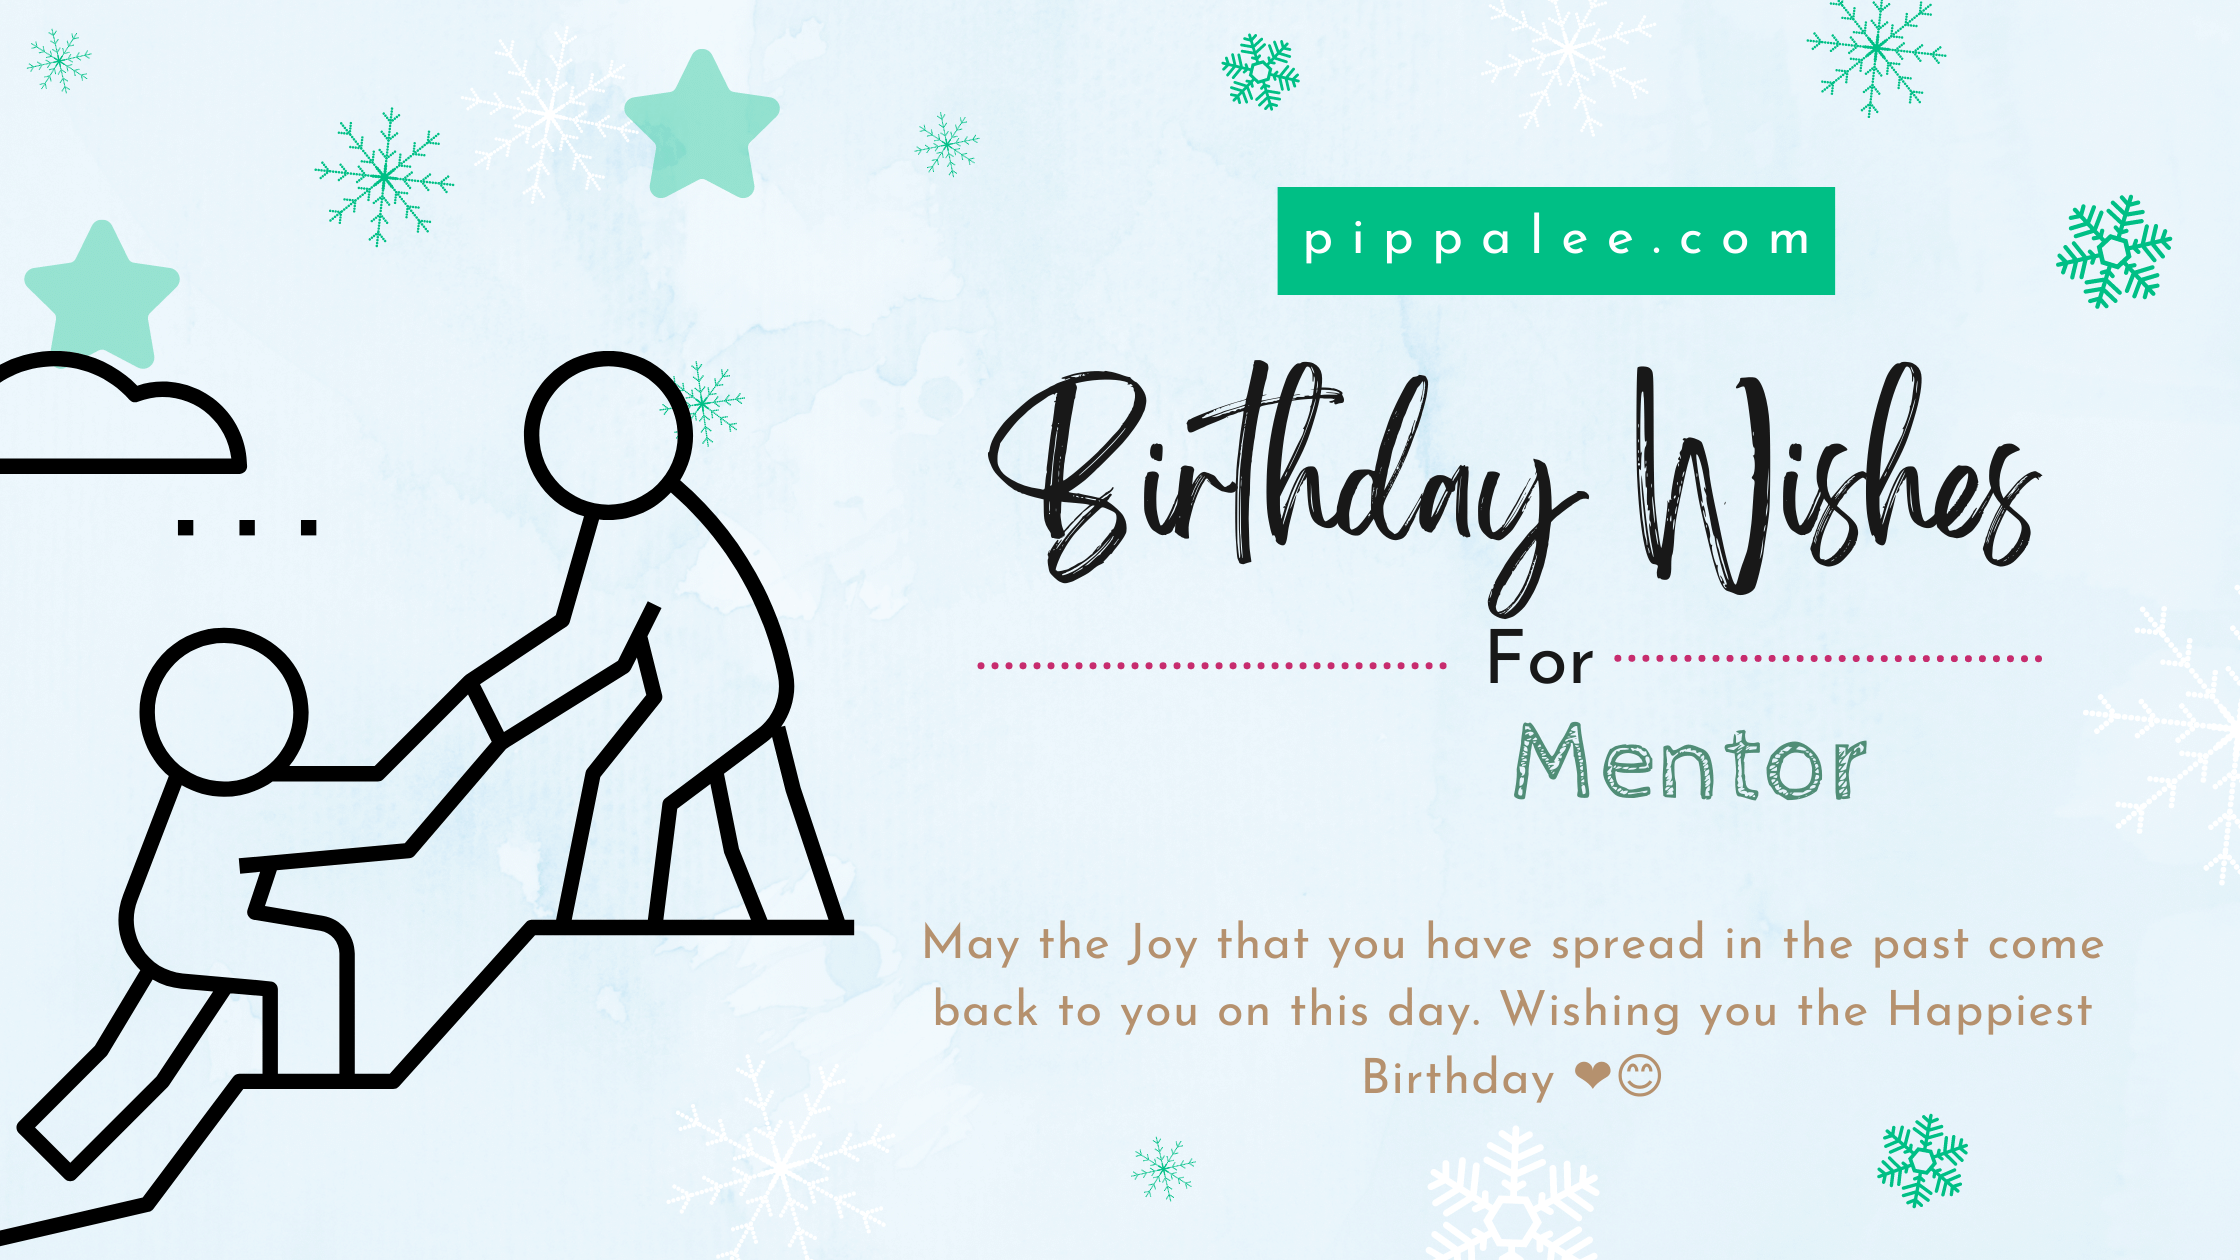 Birthday Wishes For Mentor - Wishes & Messages